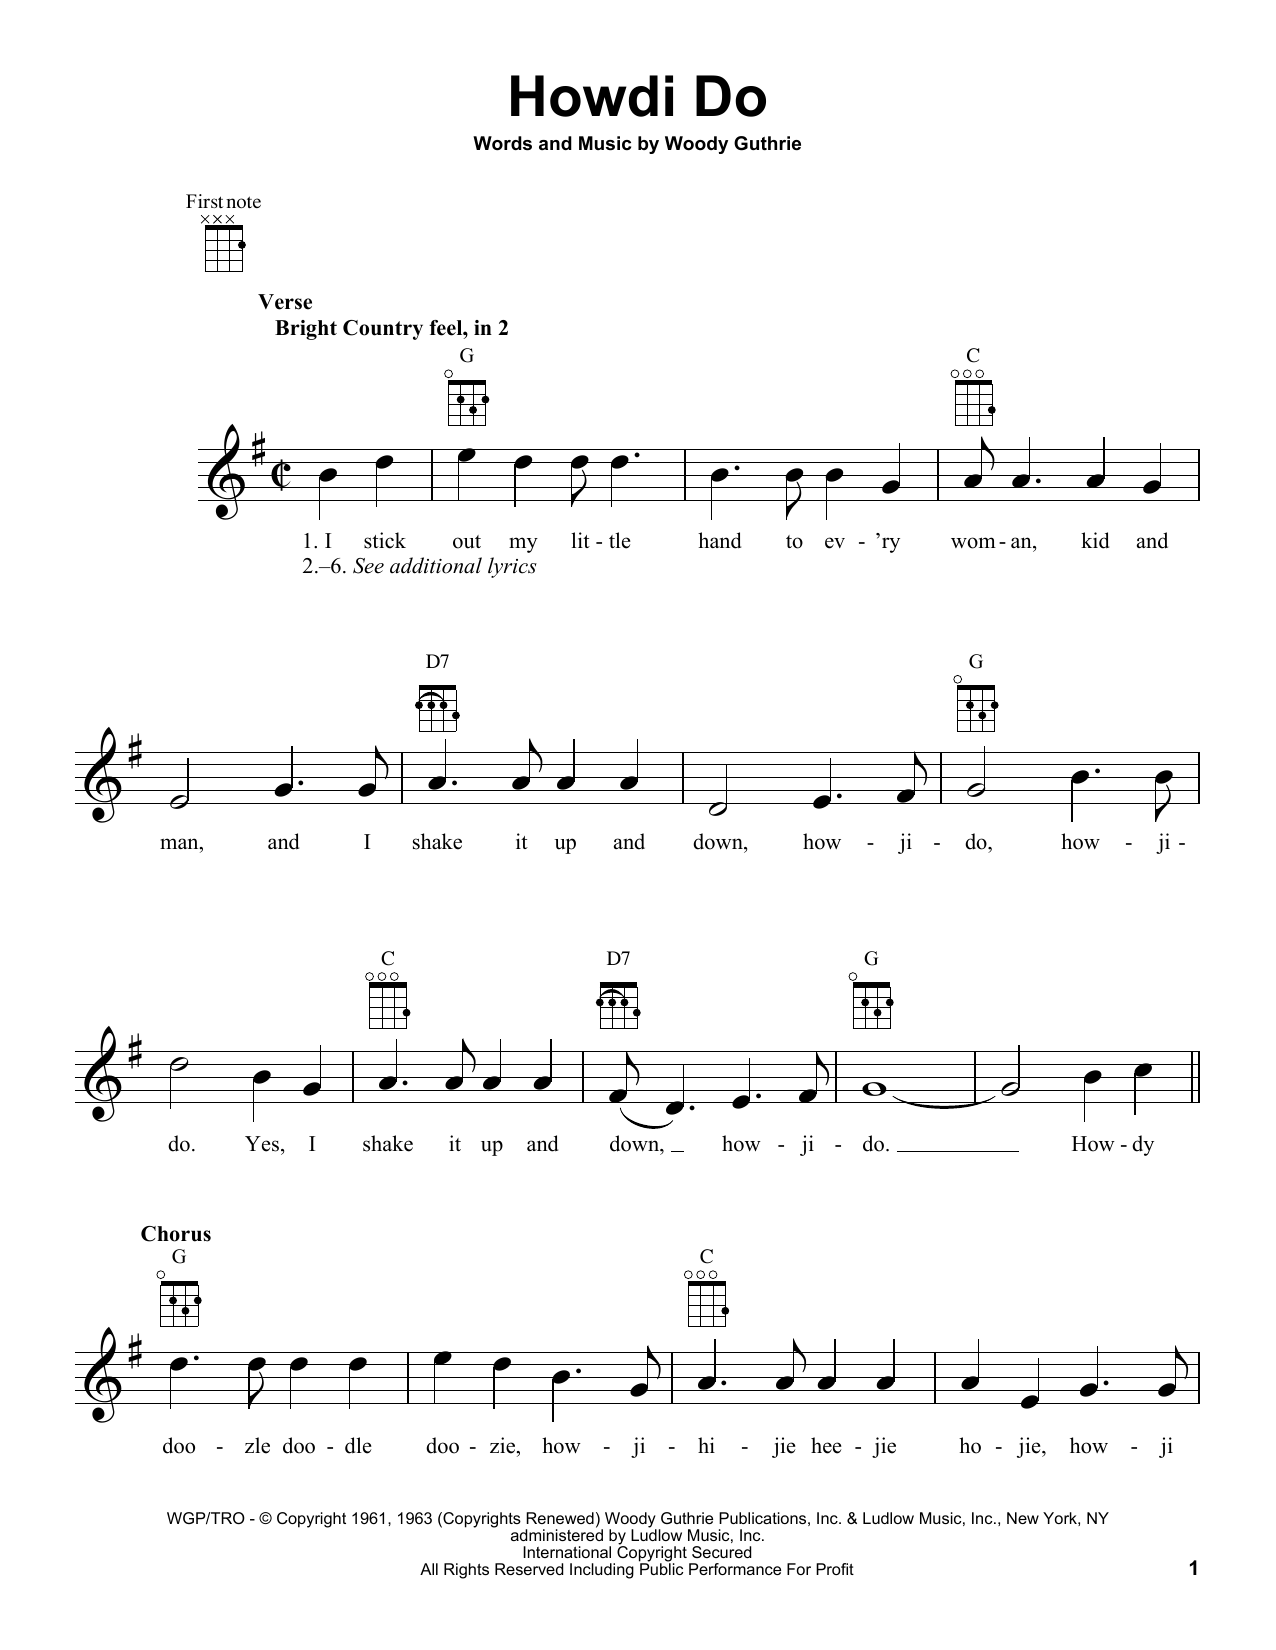 Download Woody Guthrie Howdi Do Sheet Music